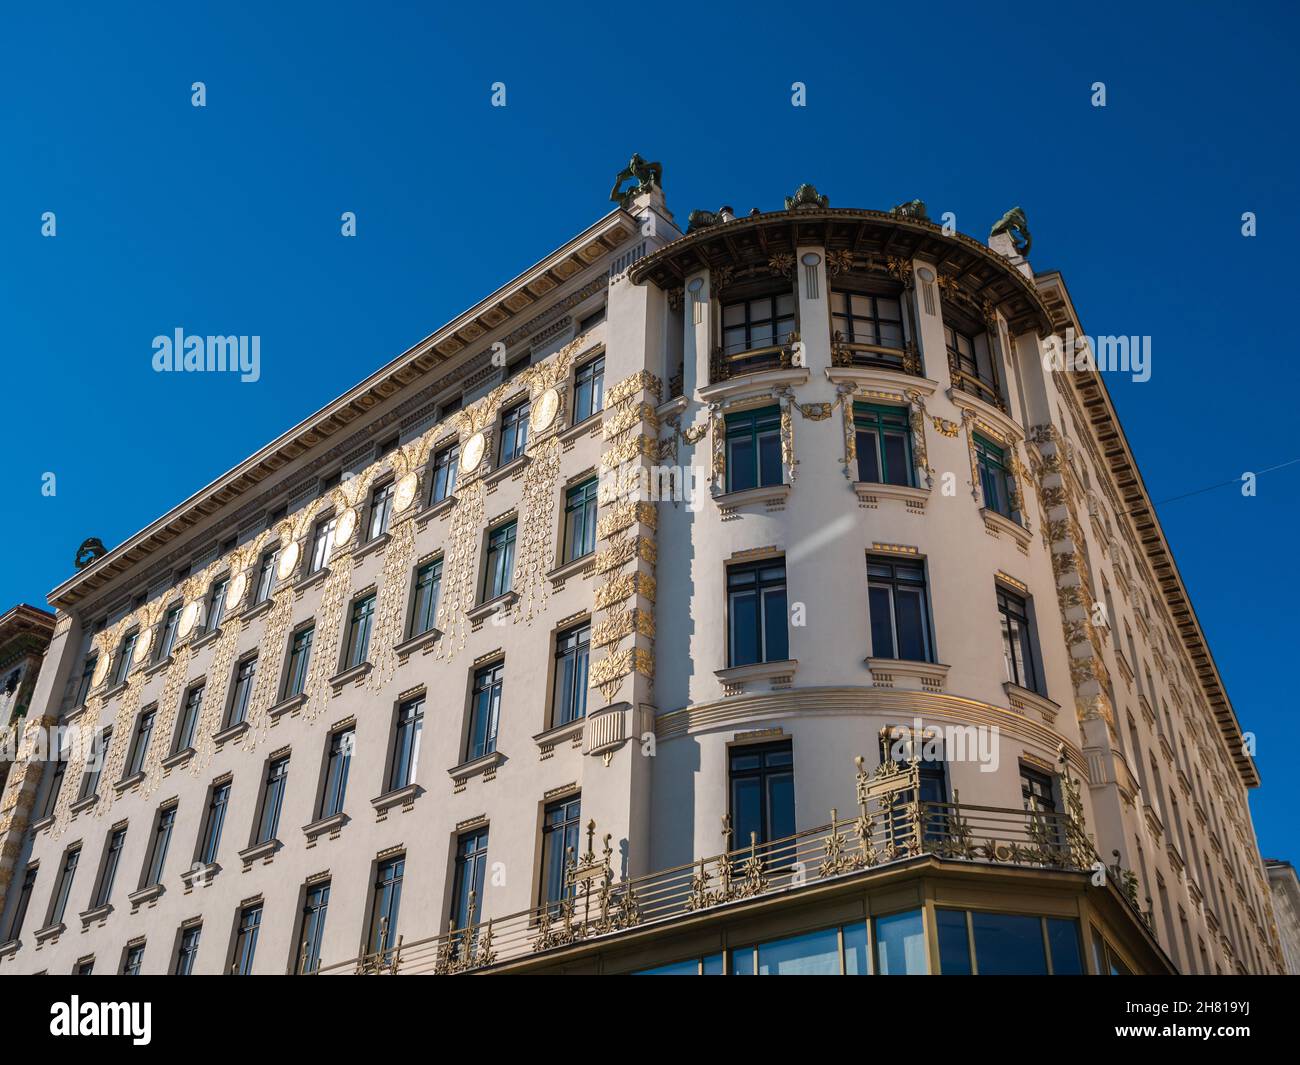 Linke Wienzeile or Medaillon House designed by Otto Wagner in 1898, an art nouveau redidential building in Vienna, Austria. Stock Photo